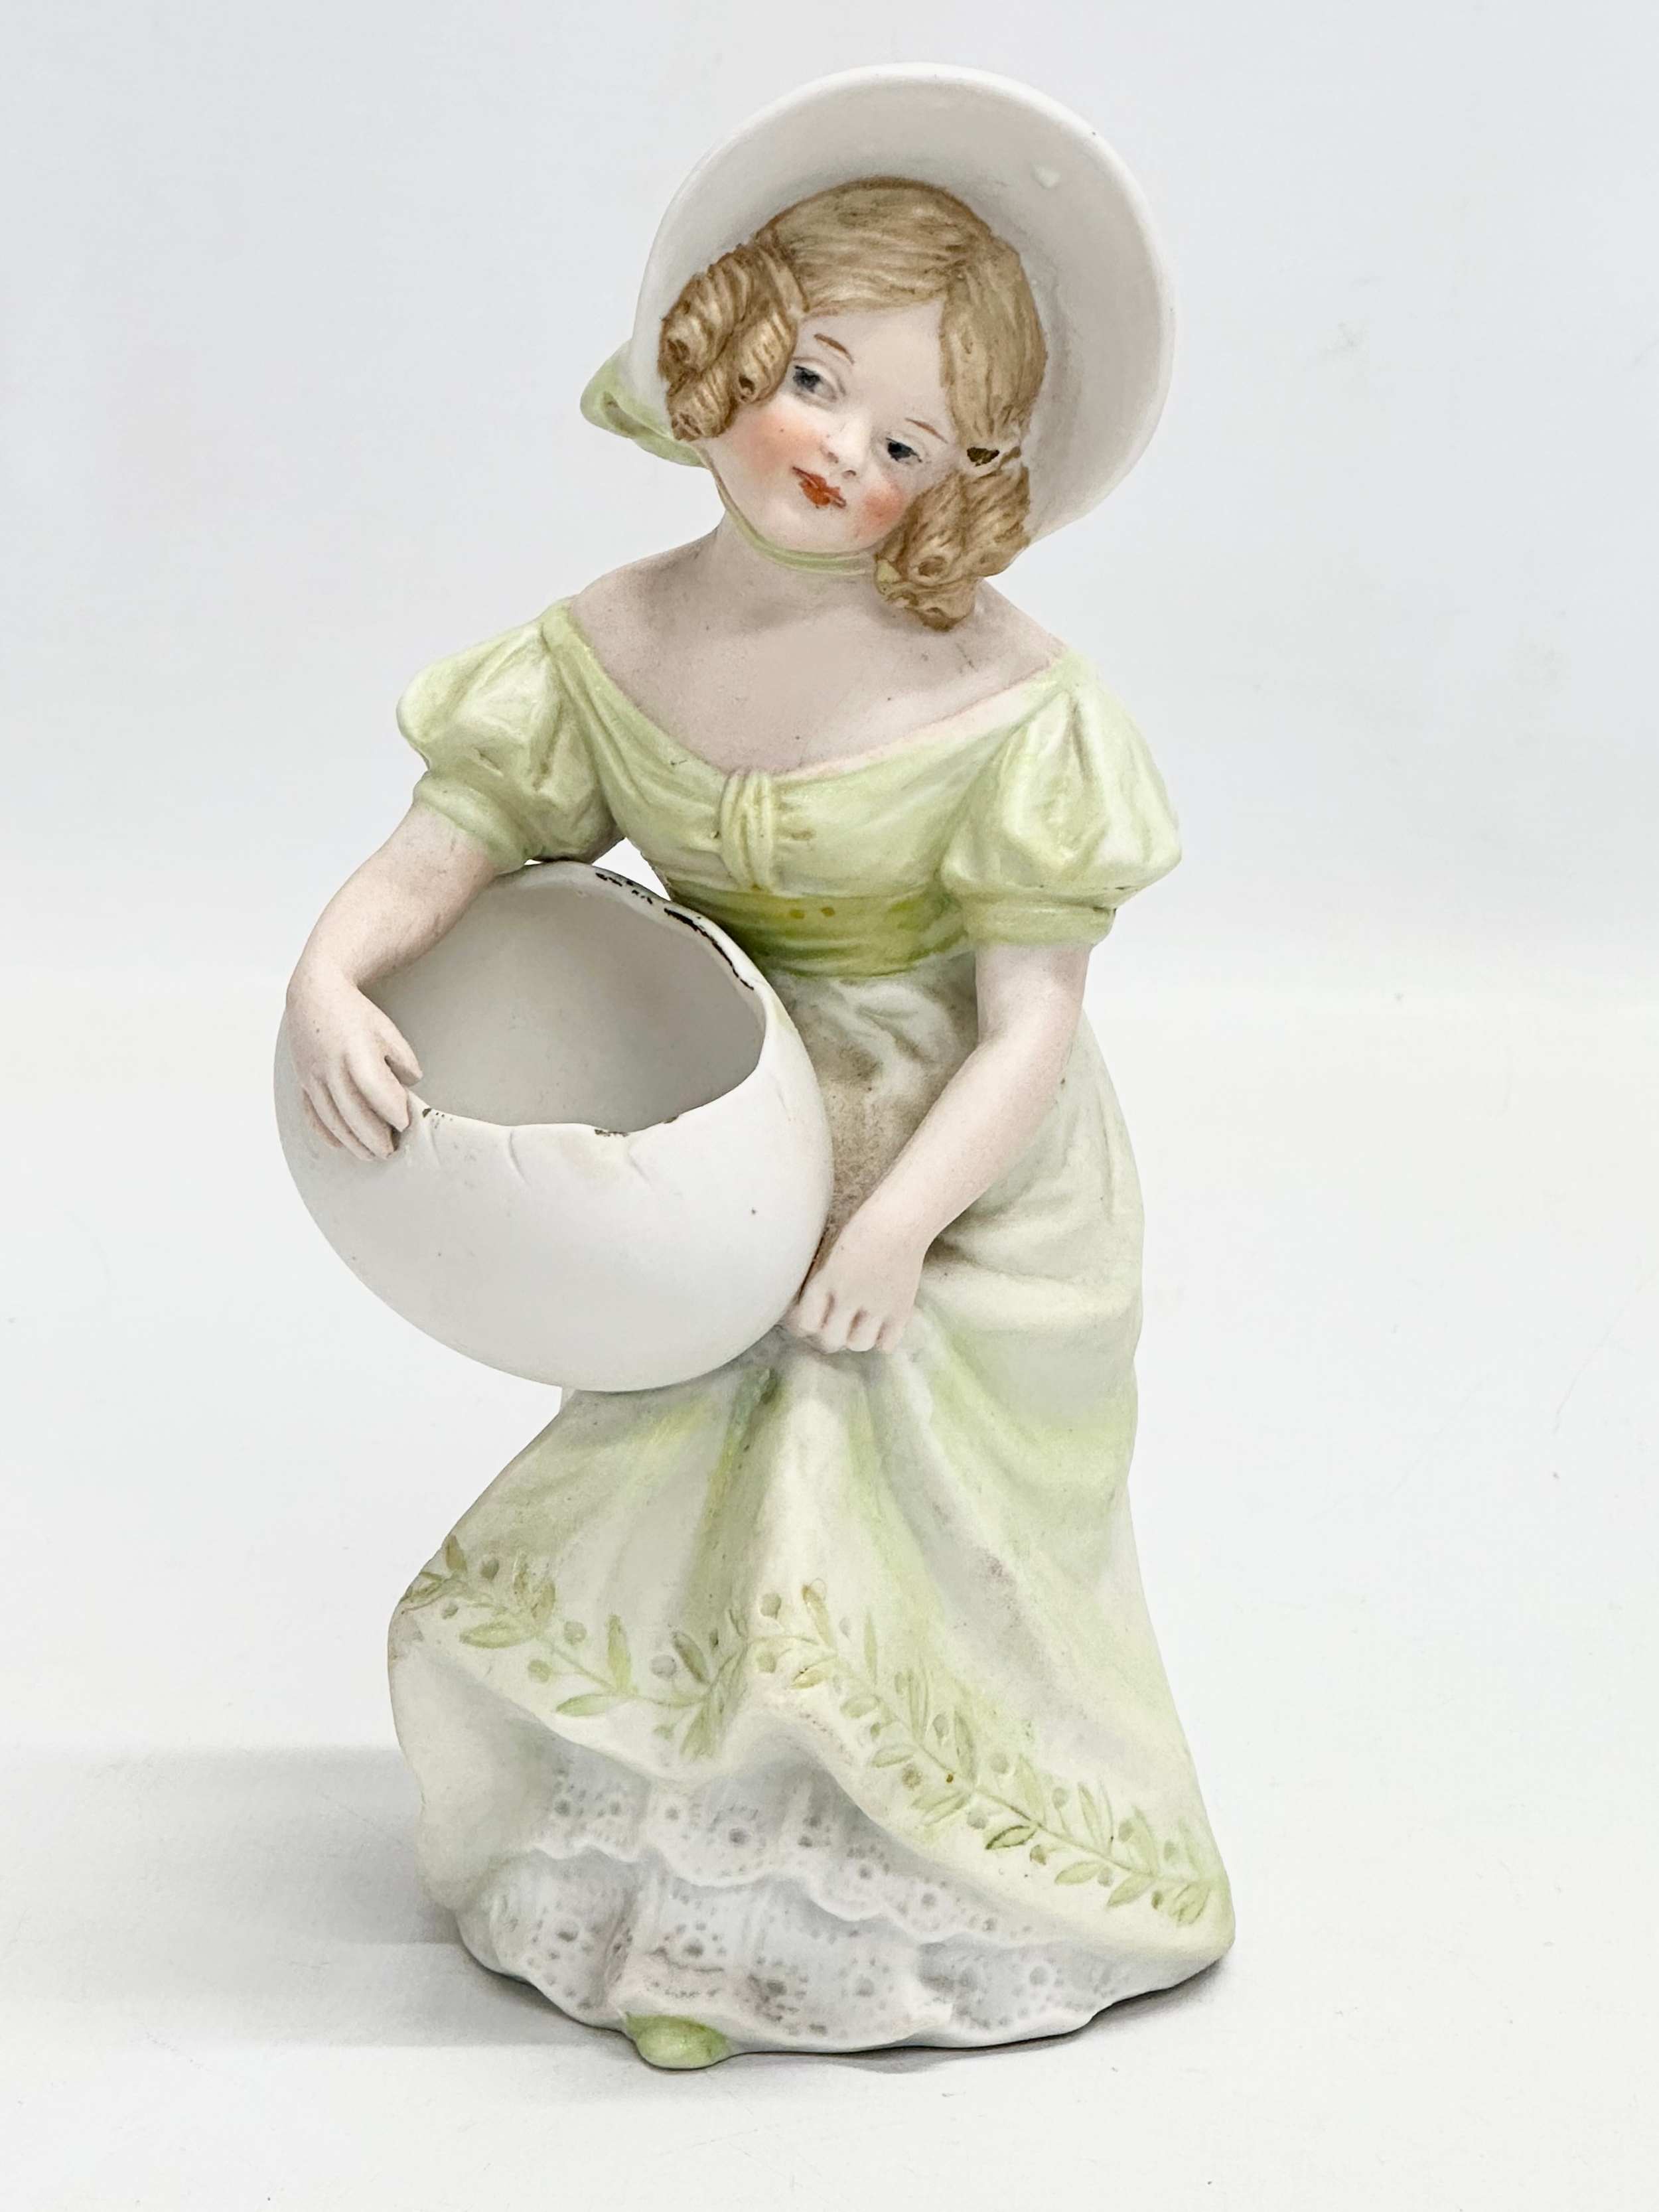 A late 19th century Heubach bisque figurine. 19cm.